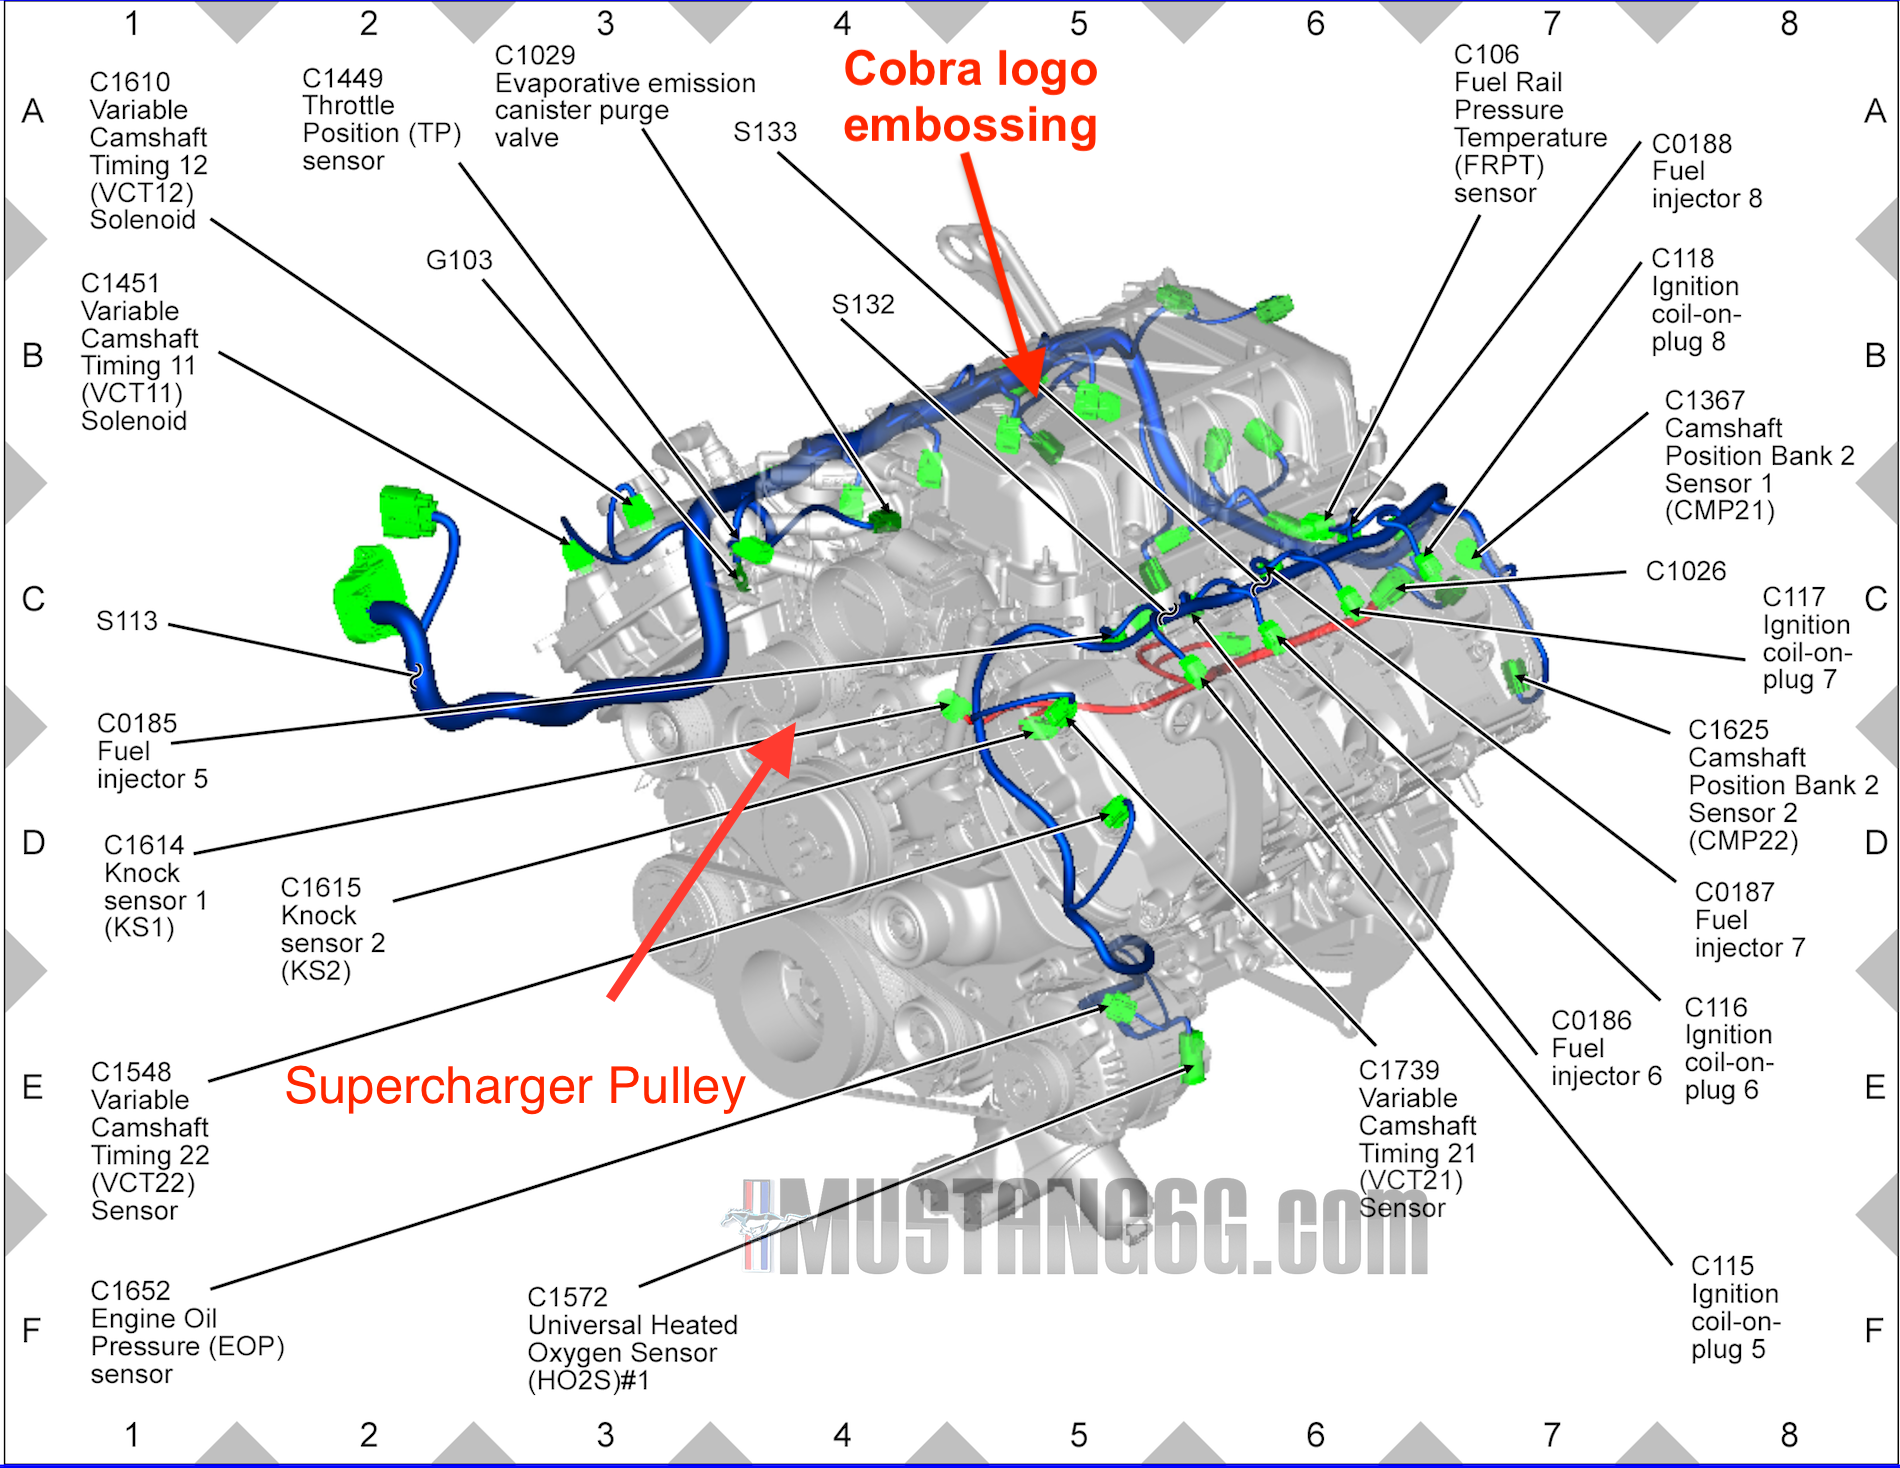 Leaked: 2019 GT500 5.2L Supercharged Engine Wiring CAD Diagram from Ford! | 2015+ S550 Mustang ...